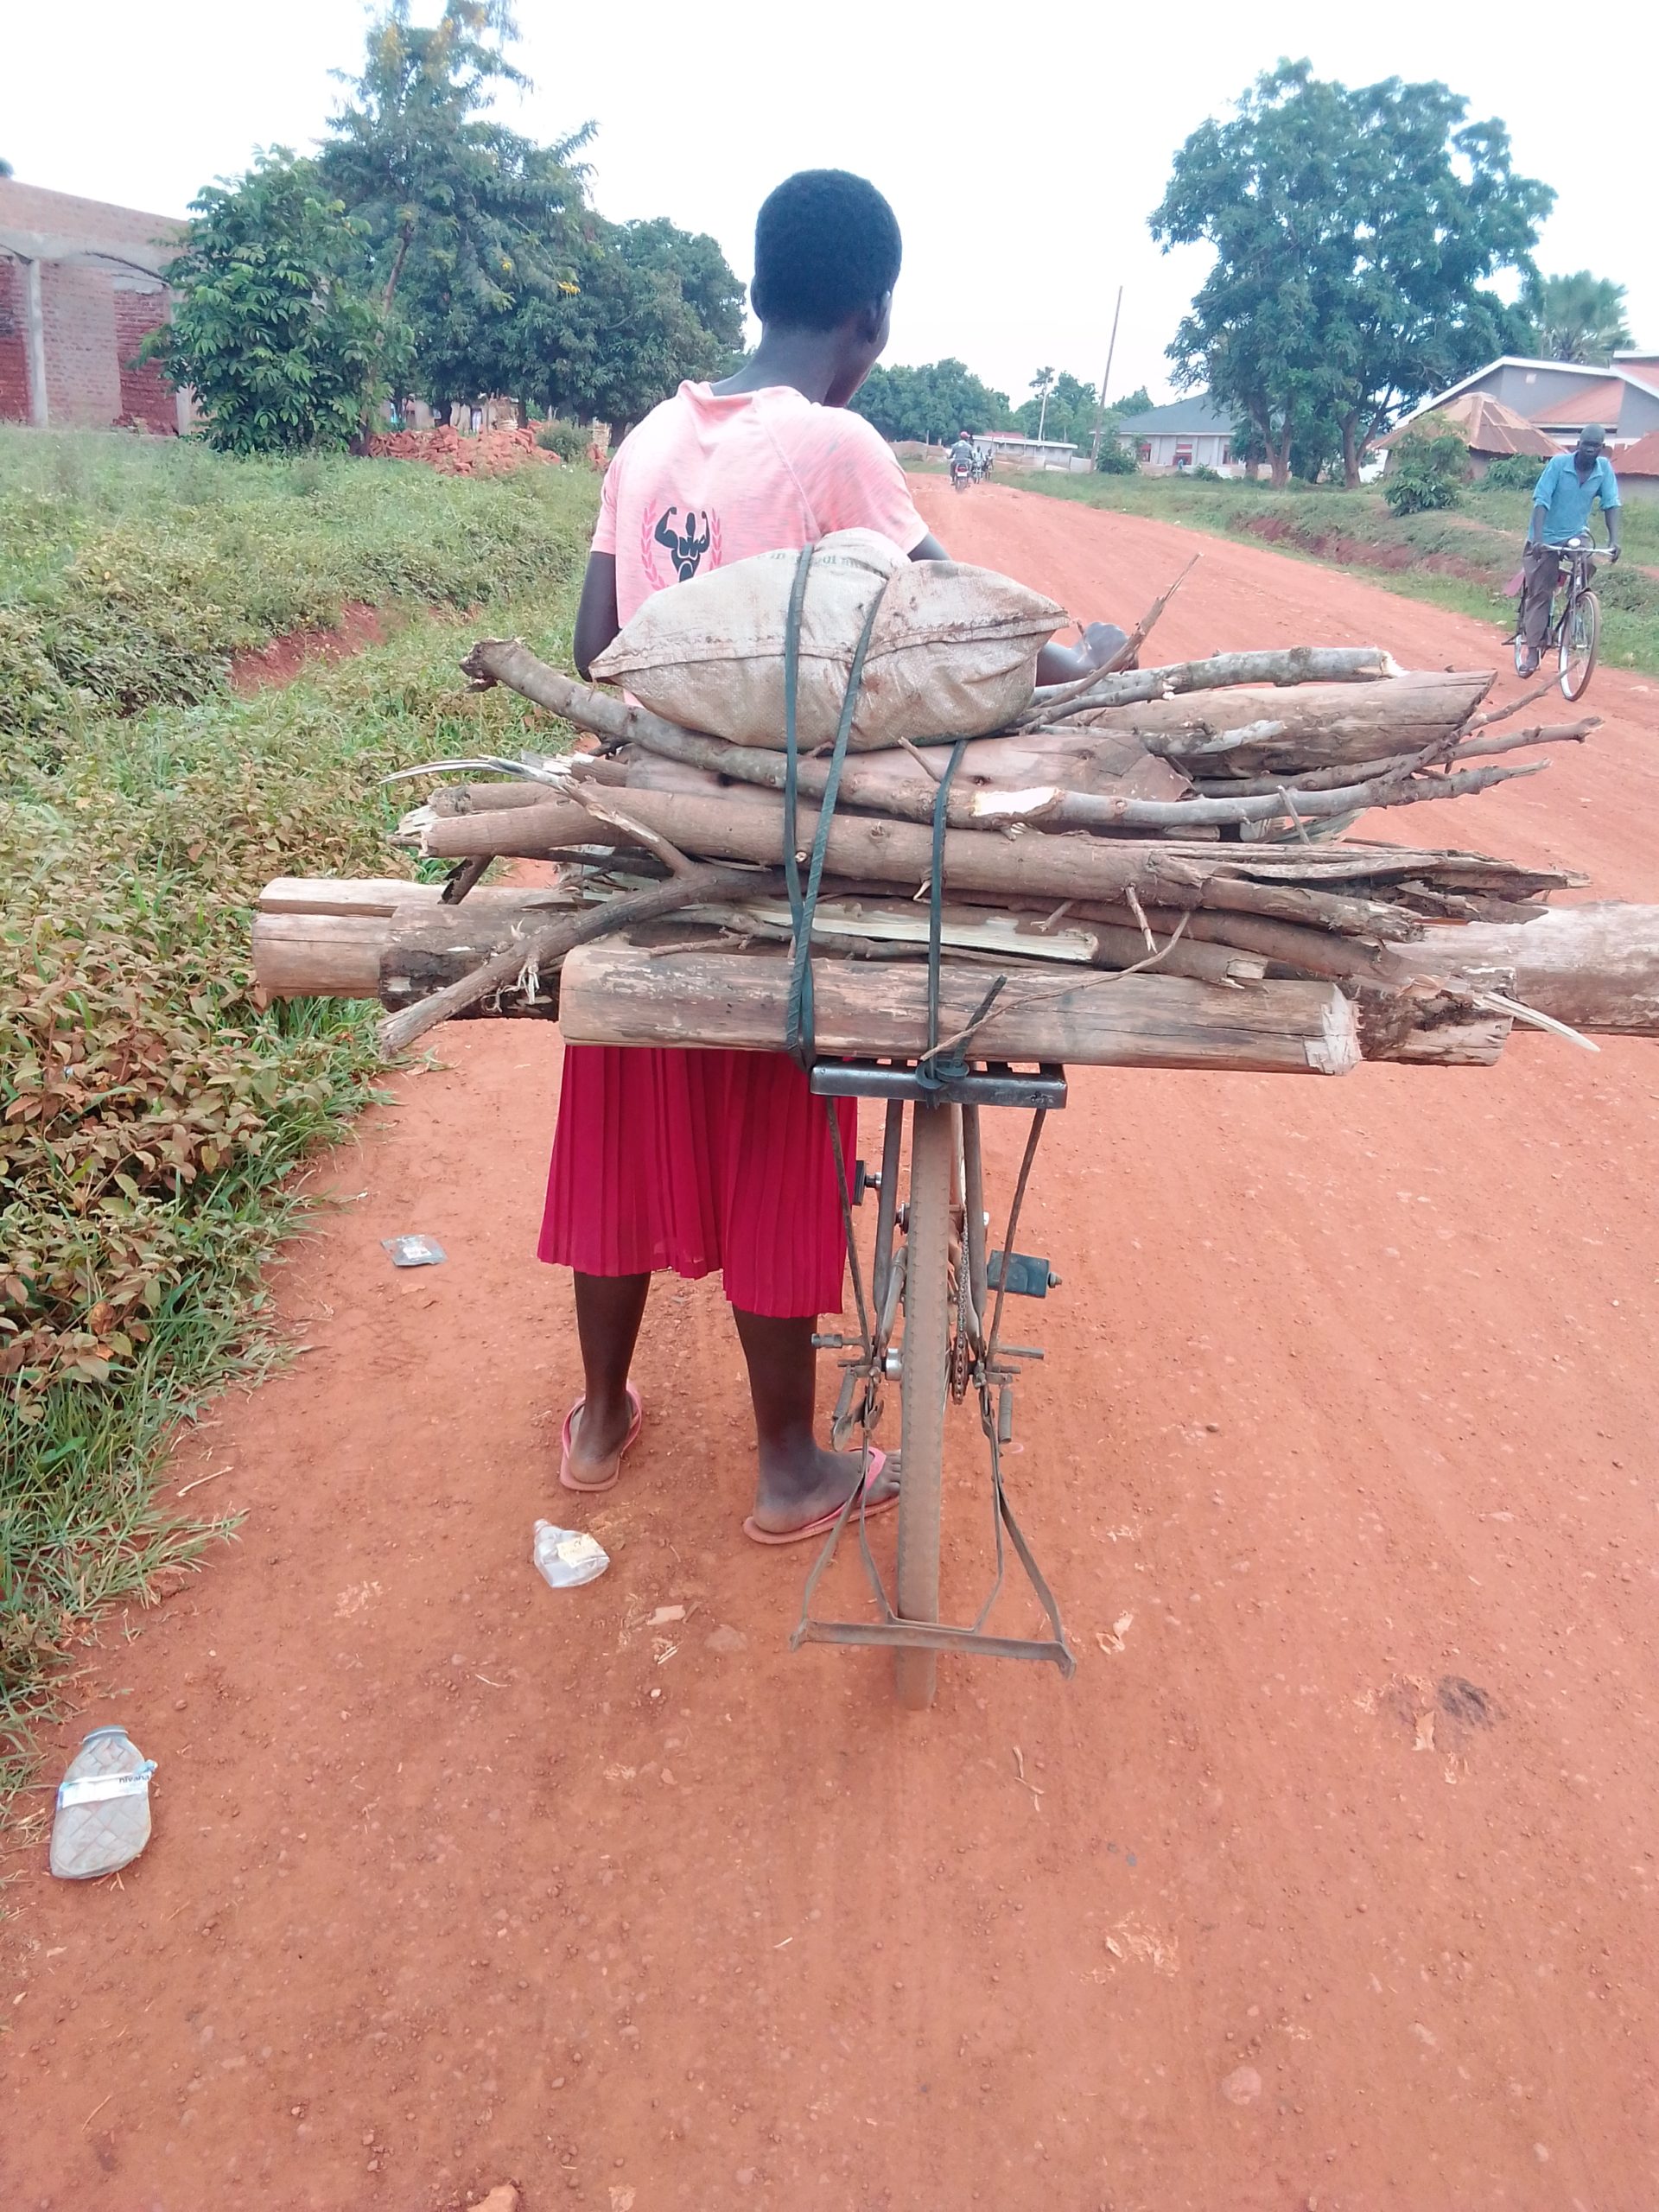 Tree felling in Uganda's West Nile Region is causing a lot of conflicts. Photo/ Awor Isabella Olong